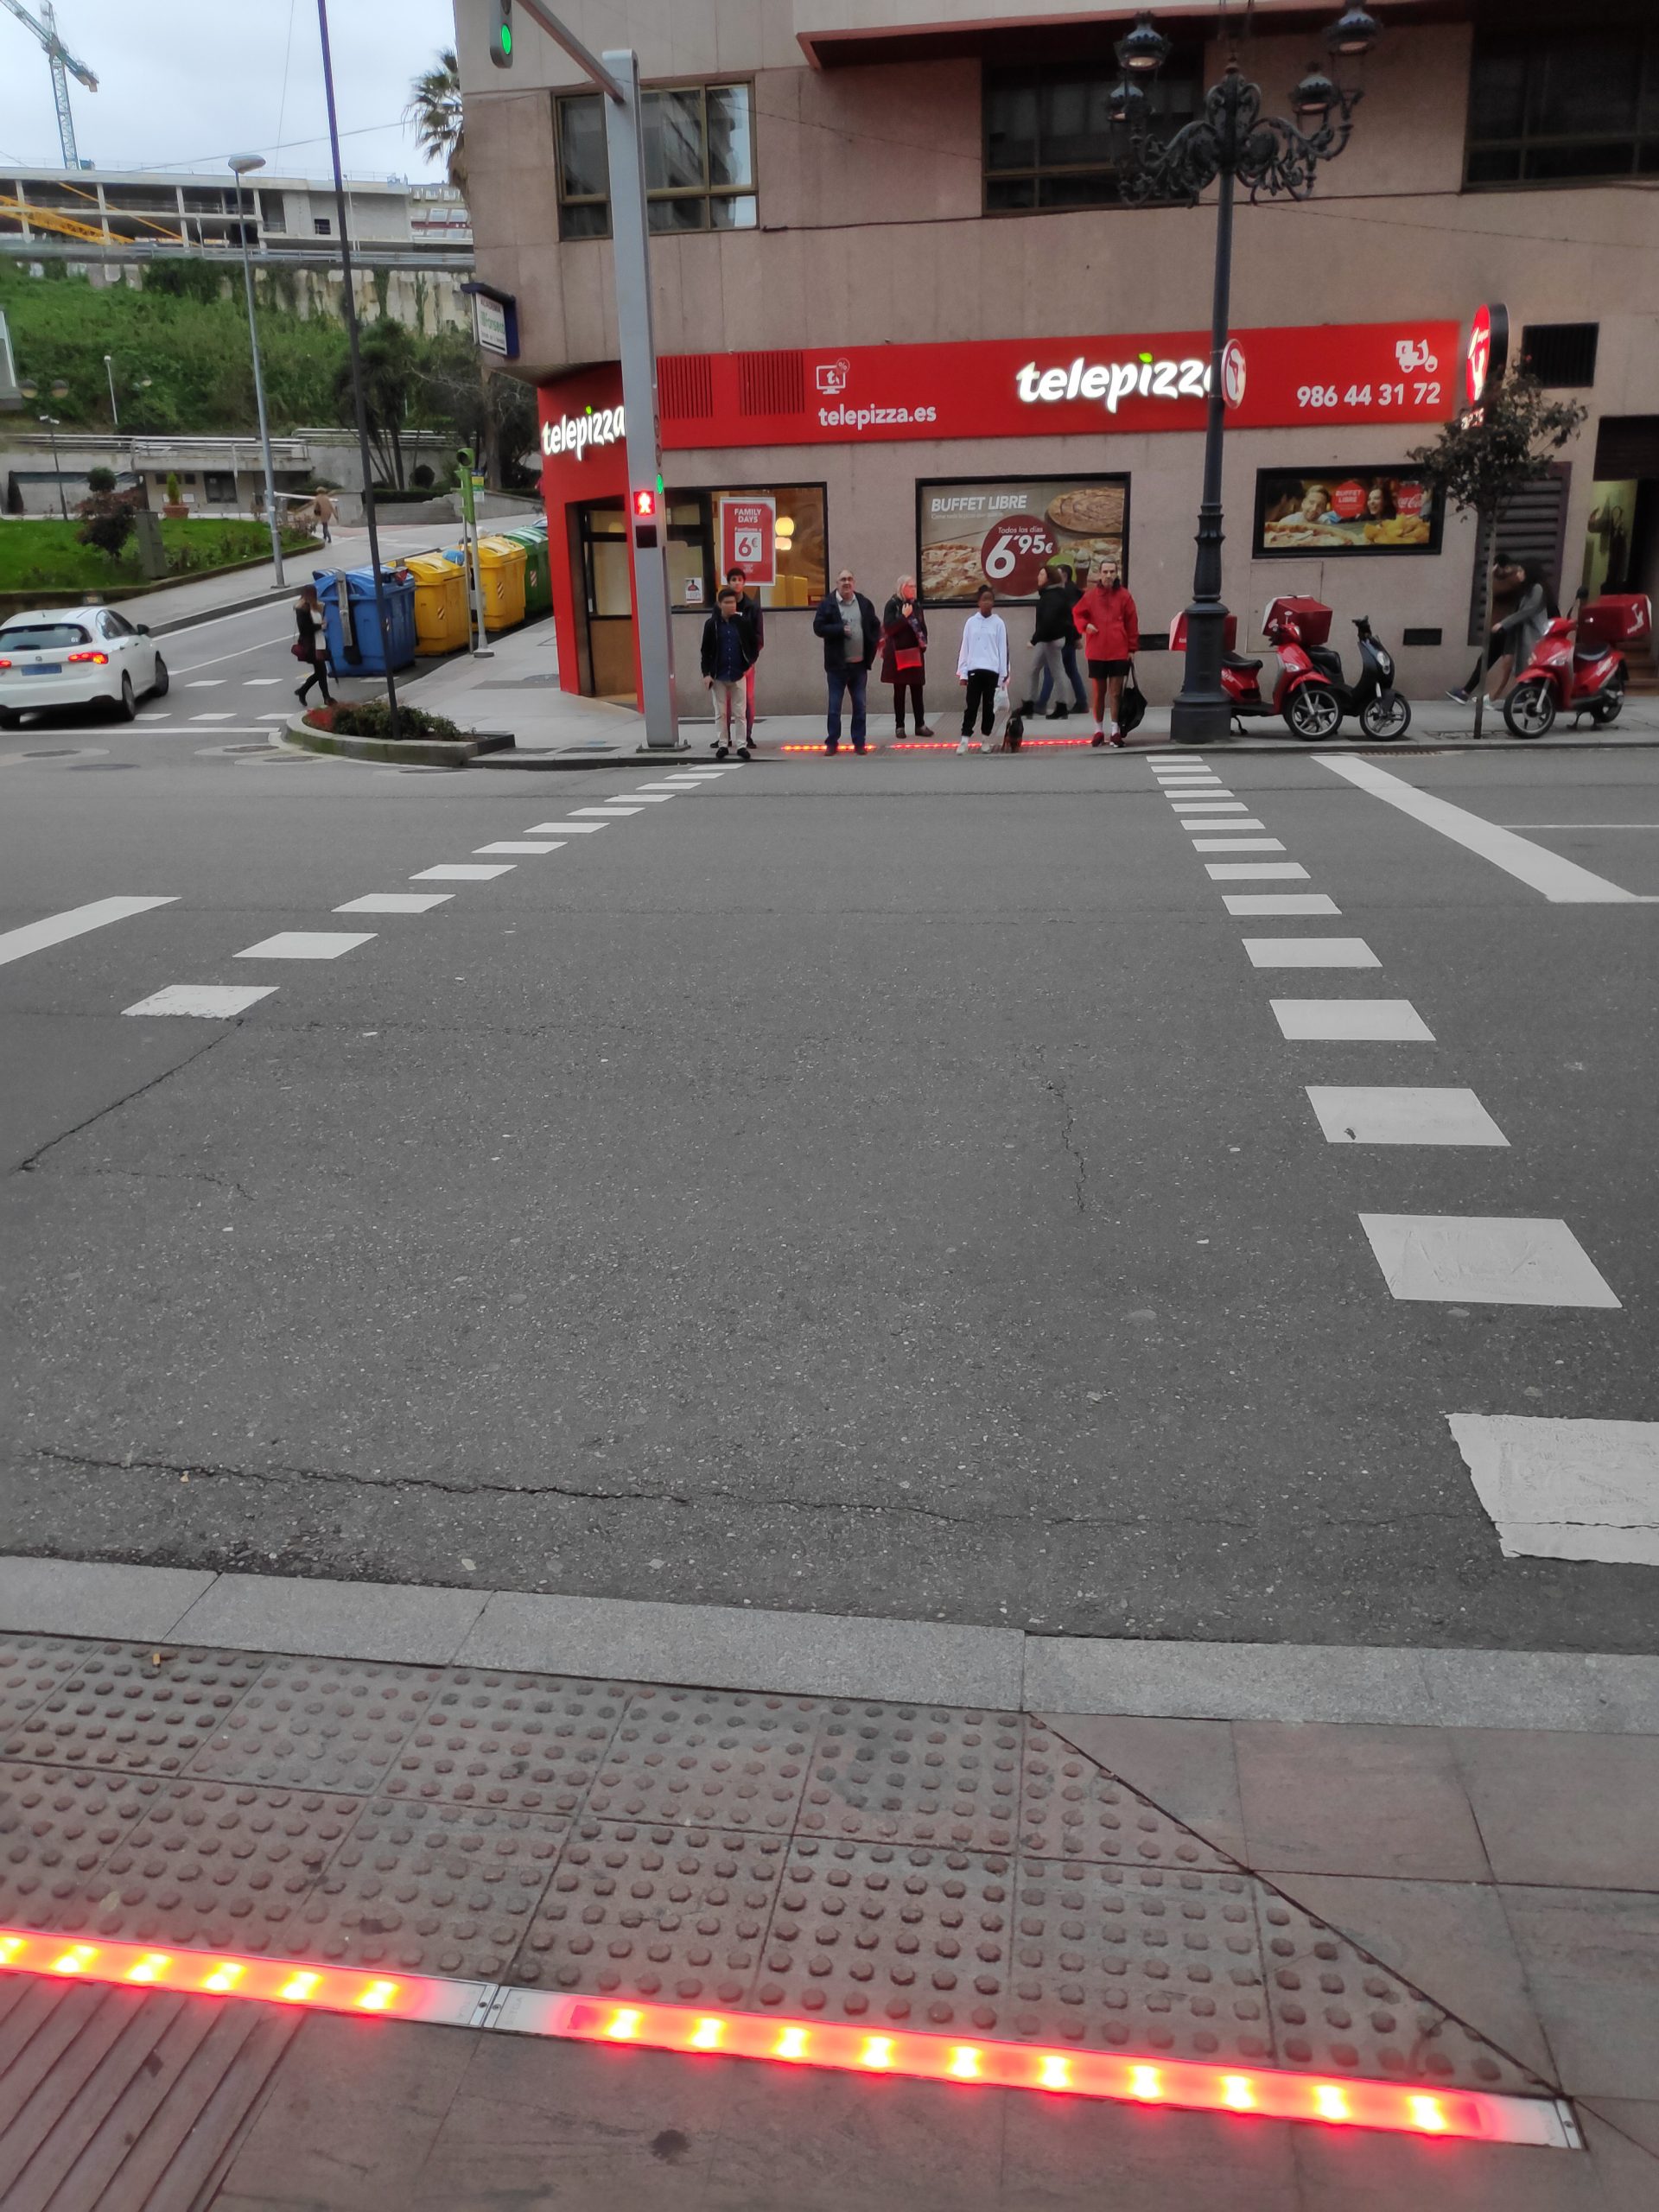 Lights integrated into the pavement turned red or green depending on the traffic light.